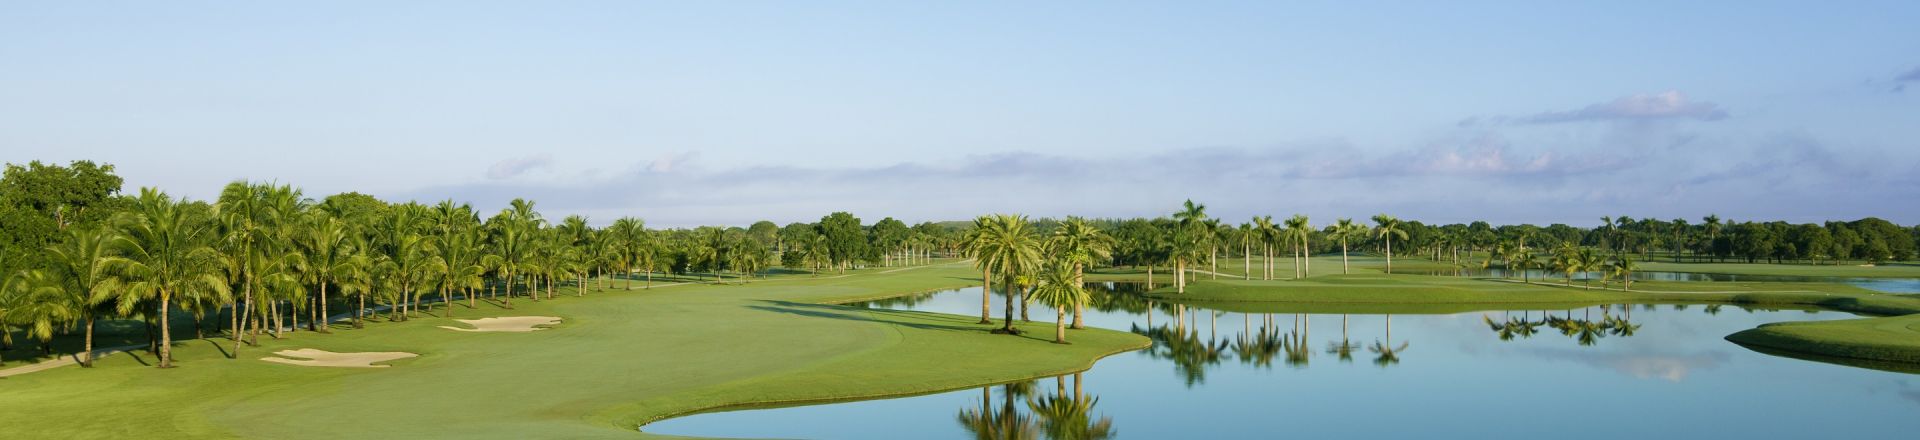 Play golf in Florida at Blue Monster Golf Course, Trump National Doral